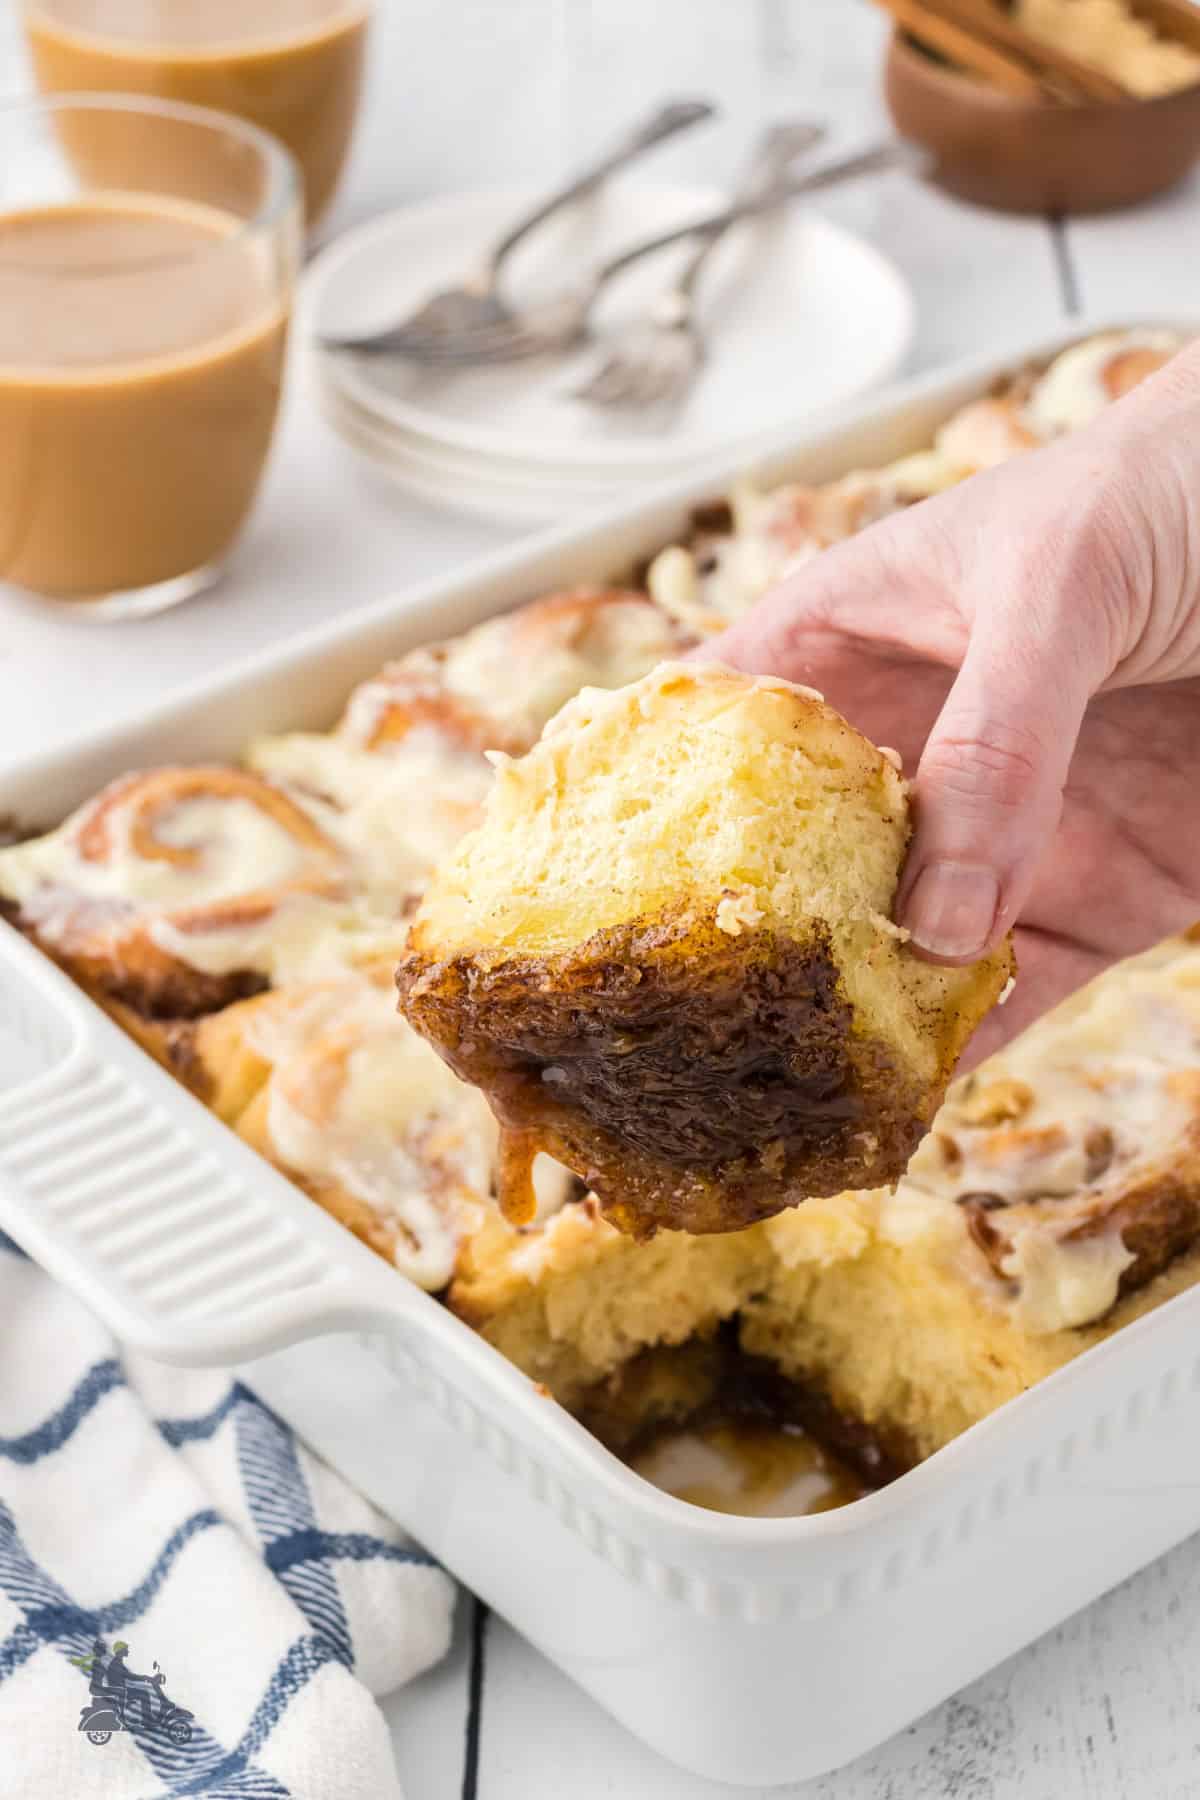 Image of the cinnamon yeast roll bottom covered in gooey caramel sauce. 